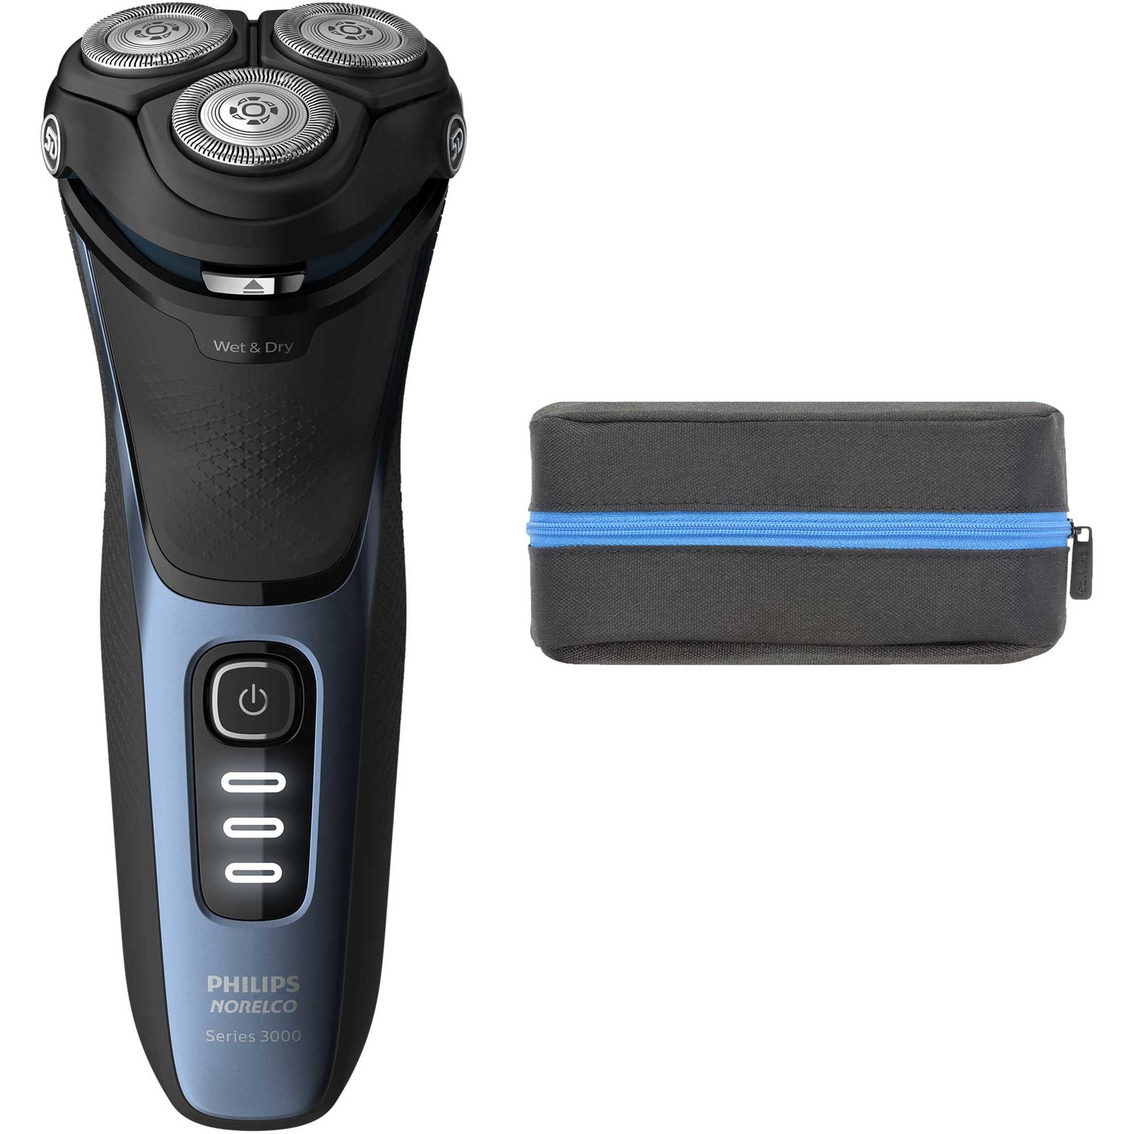 Philips Norelco 3500 Shaver - Image 2 of 10